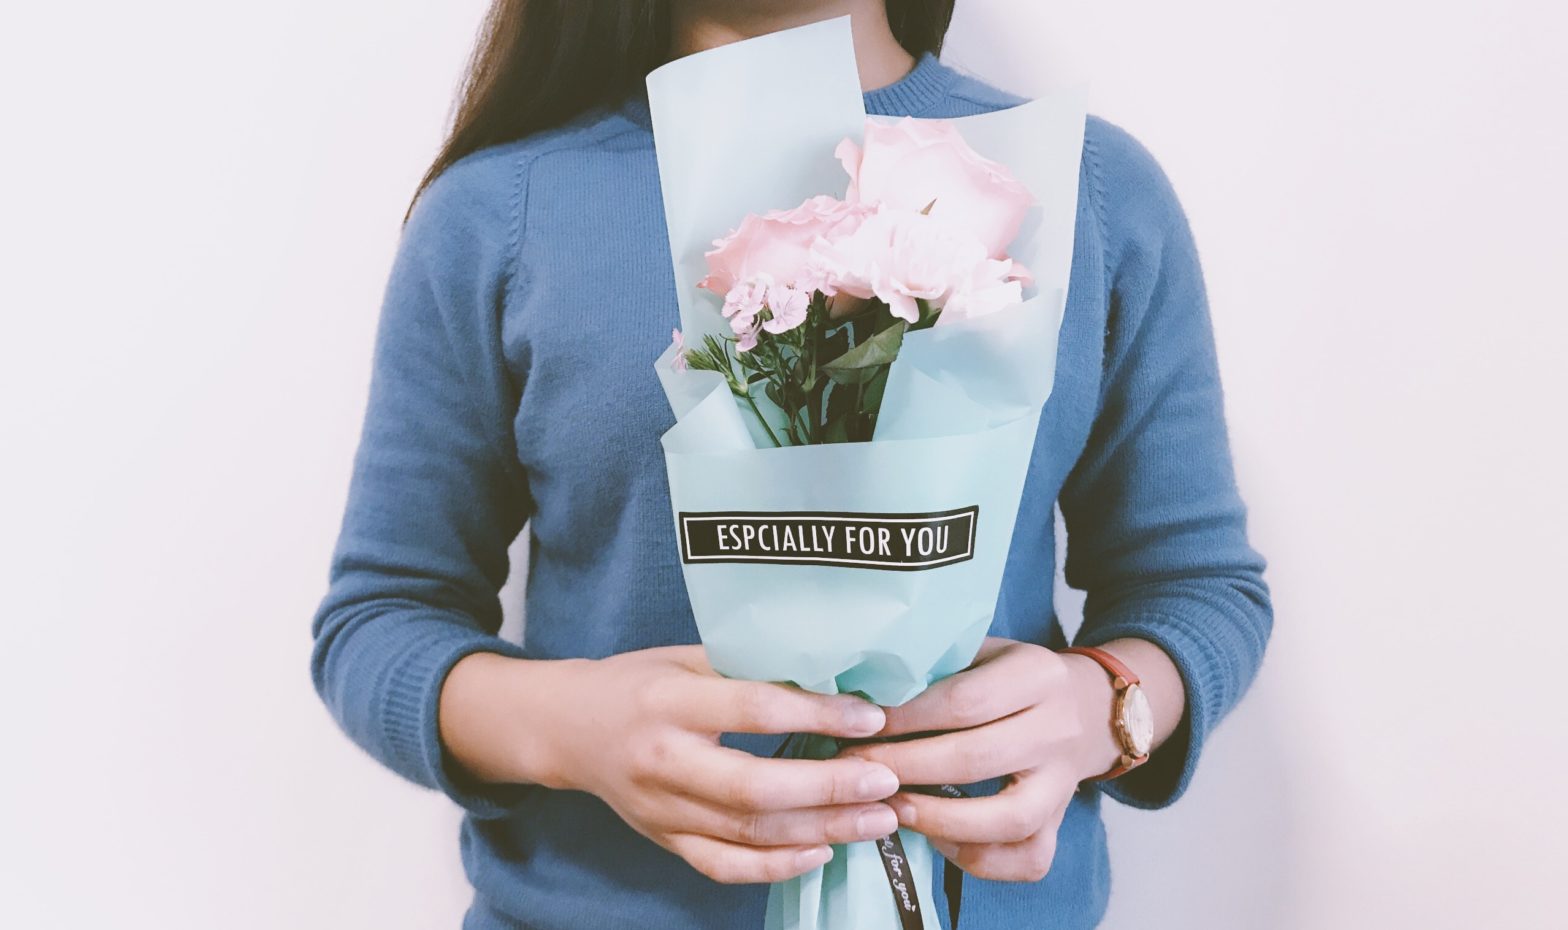 Woman receiving flowers that say especially for you.